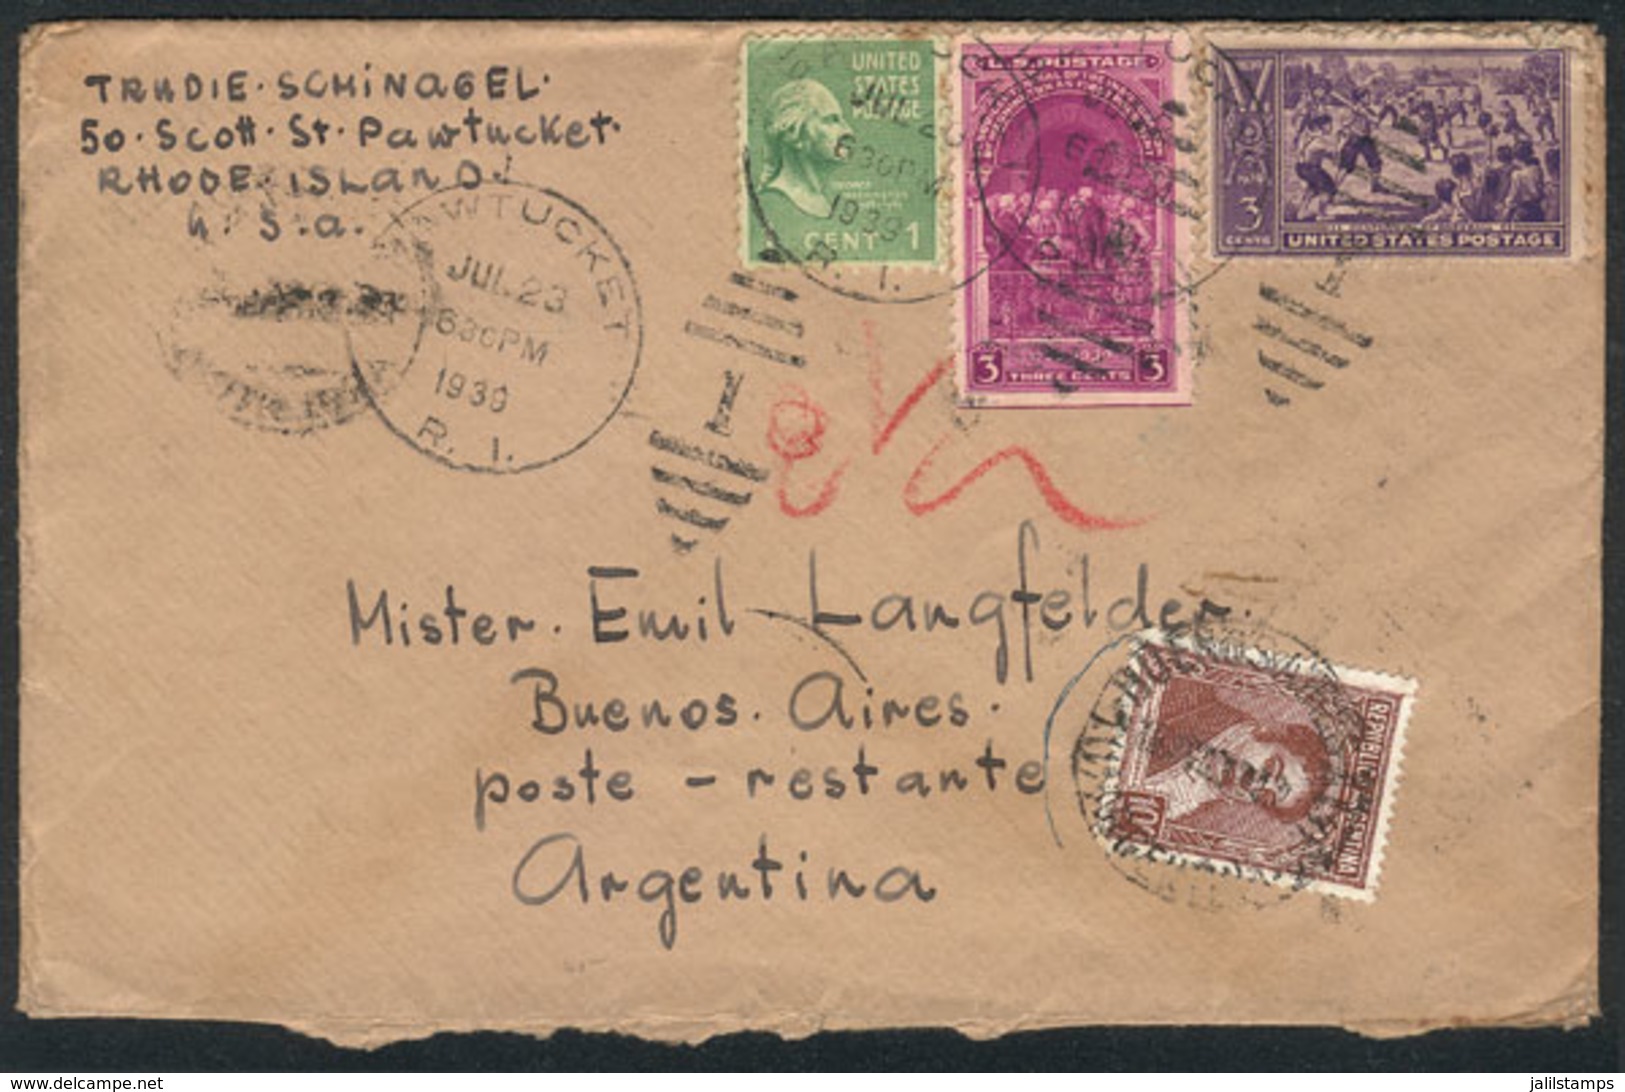 UNITED STATES: Cover Sent From Rhode Island To Poste Restante (Buenos Aires) On 20/JUL/1939, With Argentina Stamp Of 10c - Marcofilia